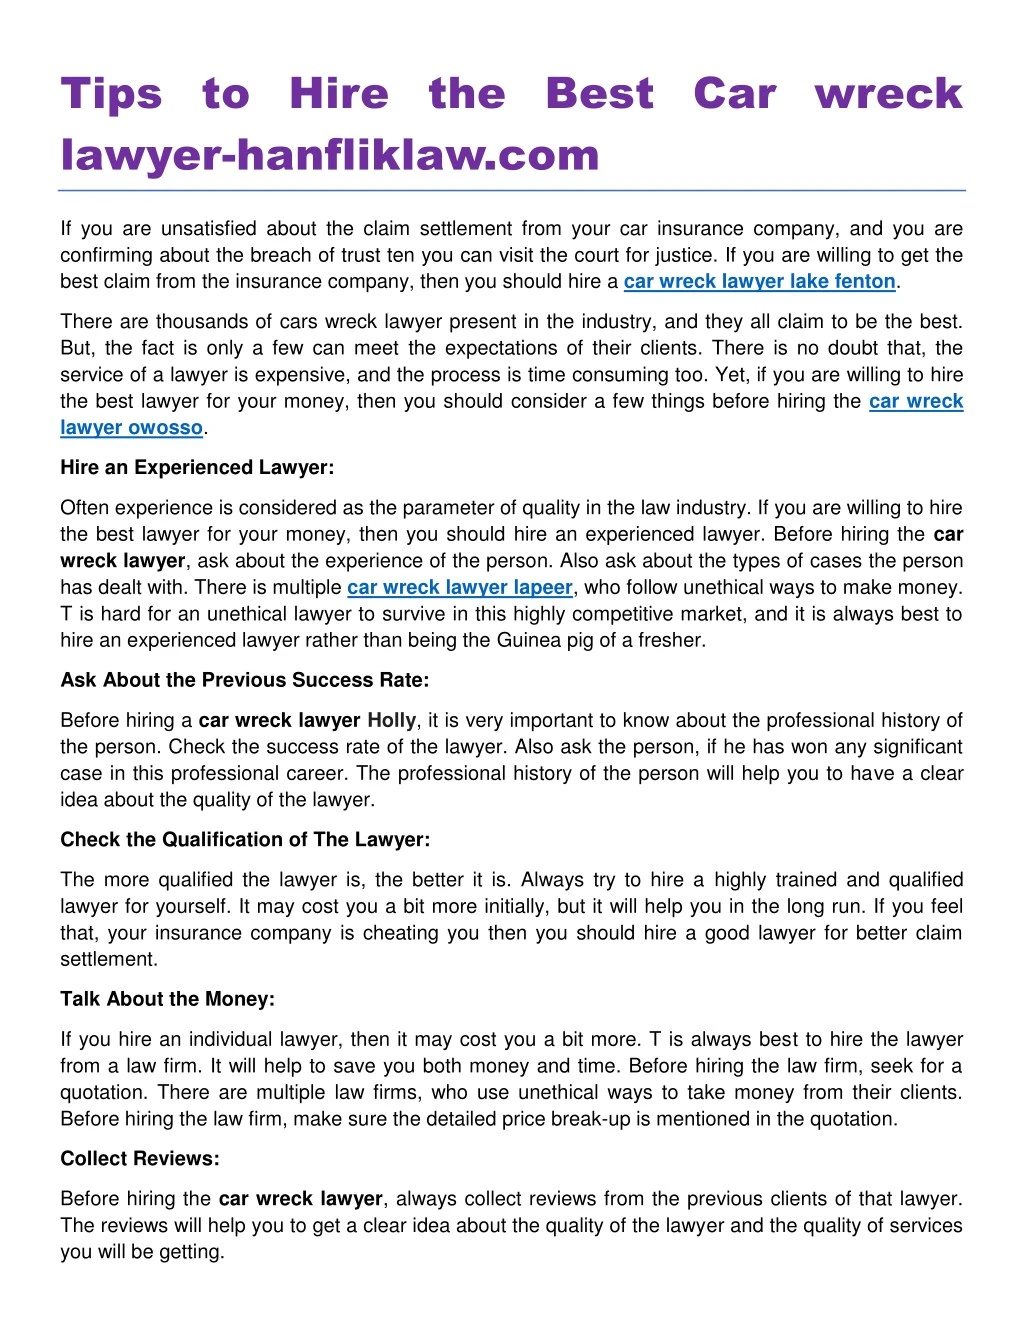 tips to hire the best car wreck lawyer hanfliklaw